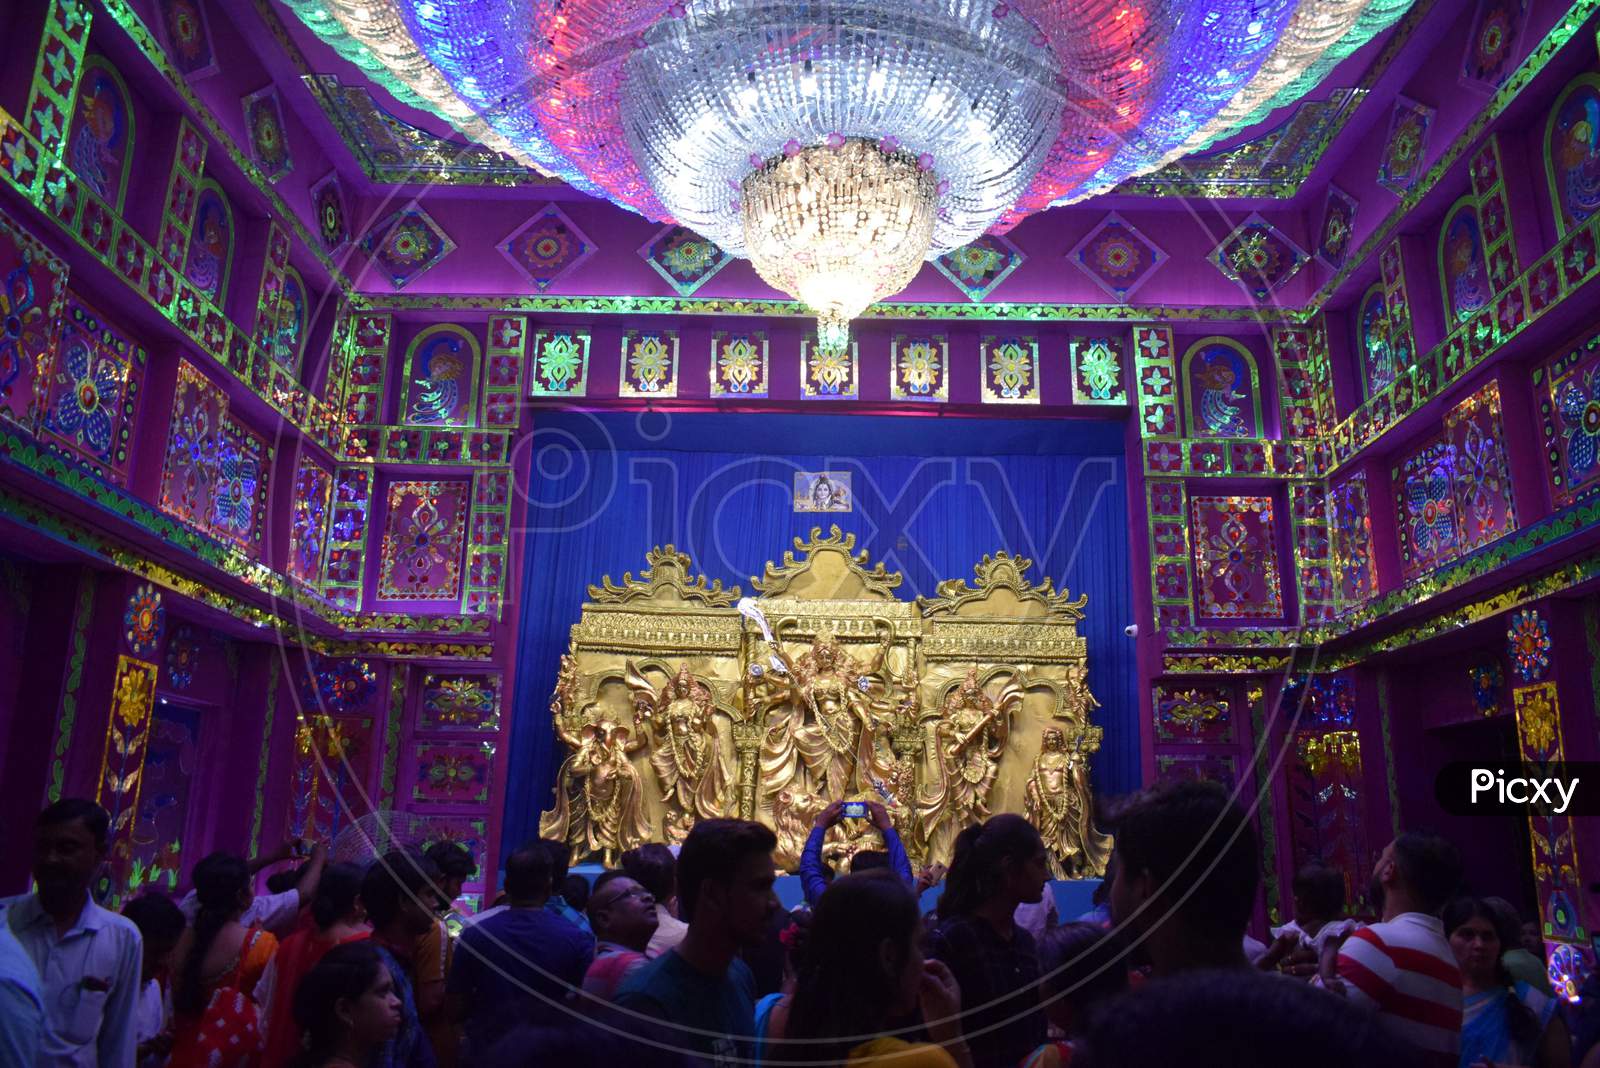 Hindu Devotees Take Blessing In Front Of The Idol Of Hindu Goddess Durga,In A 'Pandal' Ahead Of ' Dussehra' Festival. 'Dussehra' Is A Hindu Festival That Celebrates The Victory Of Good Over Evil,In Prayagraj